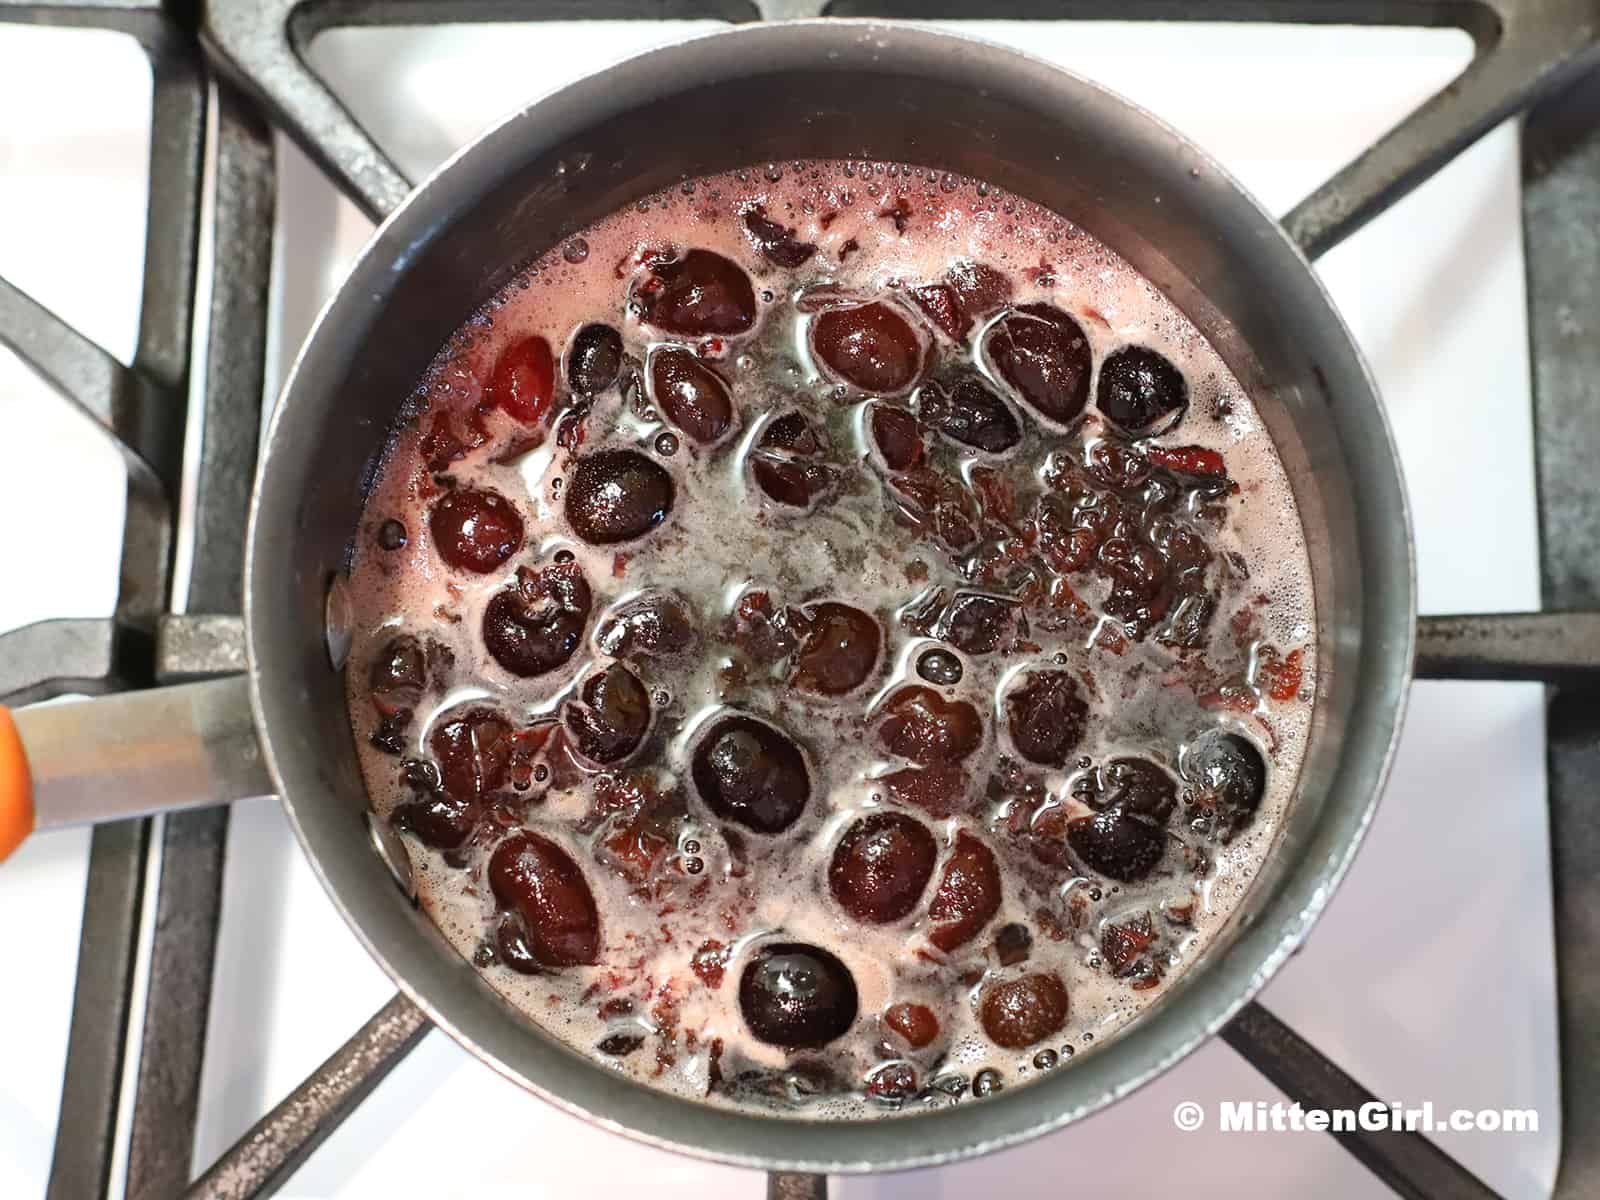 Water, sugar, and cherries cooking on the stove in a pot.